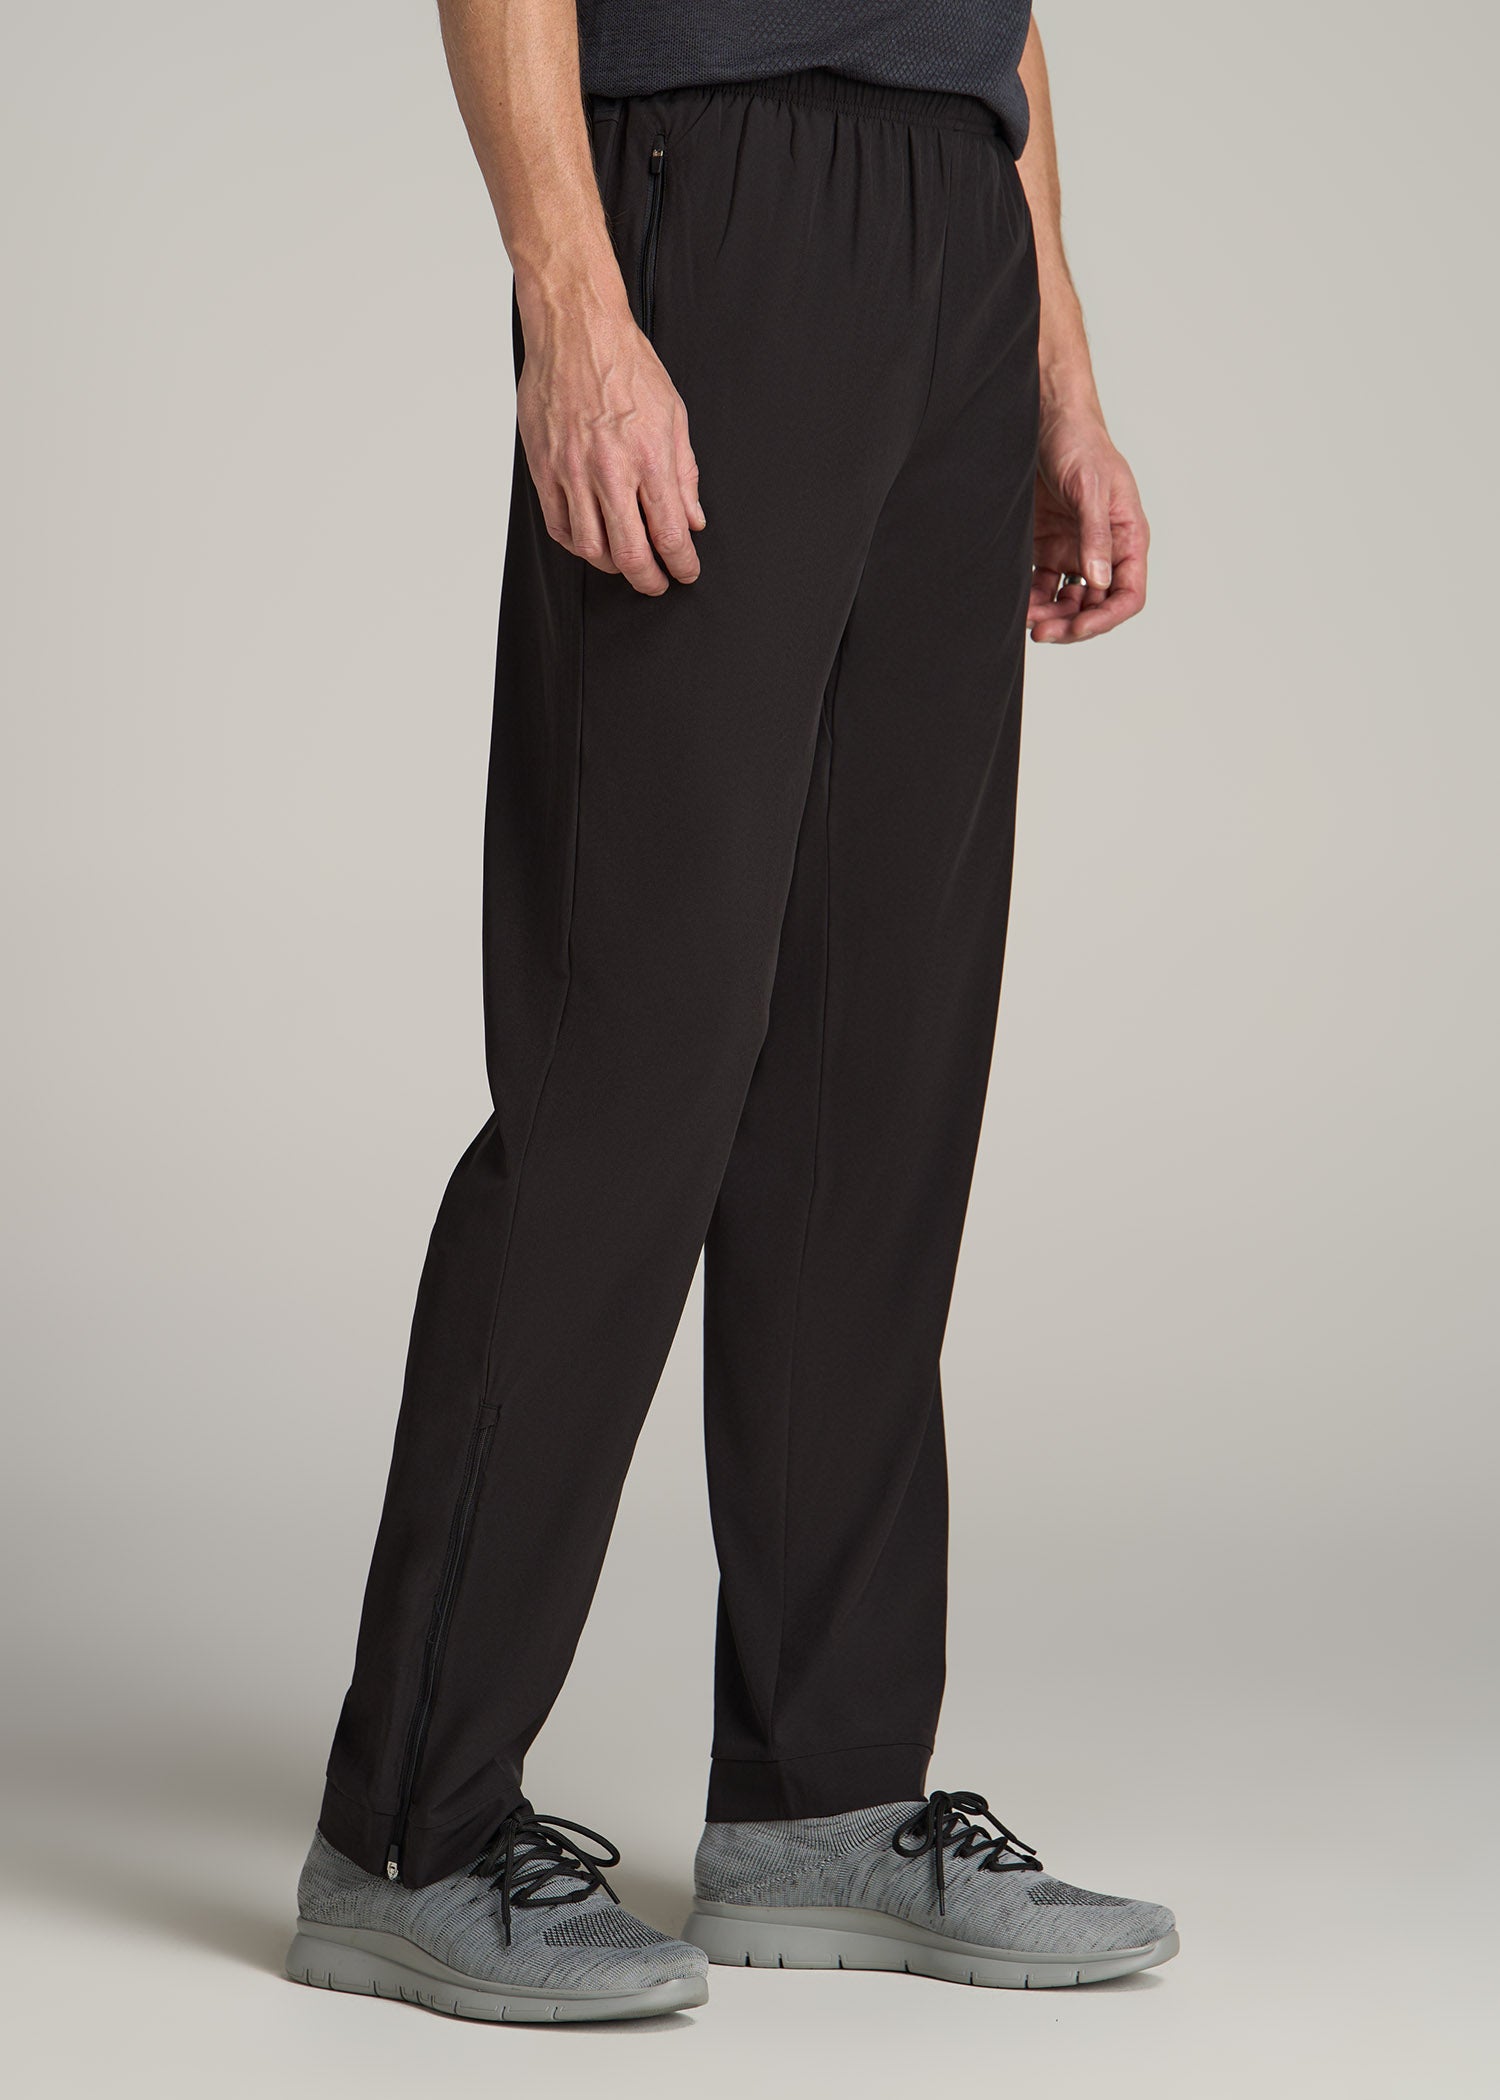 Relaxed Fit Tall Training Pant Black For Men